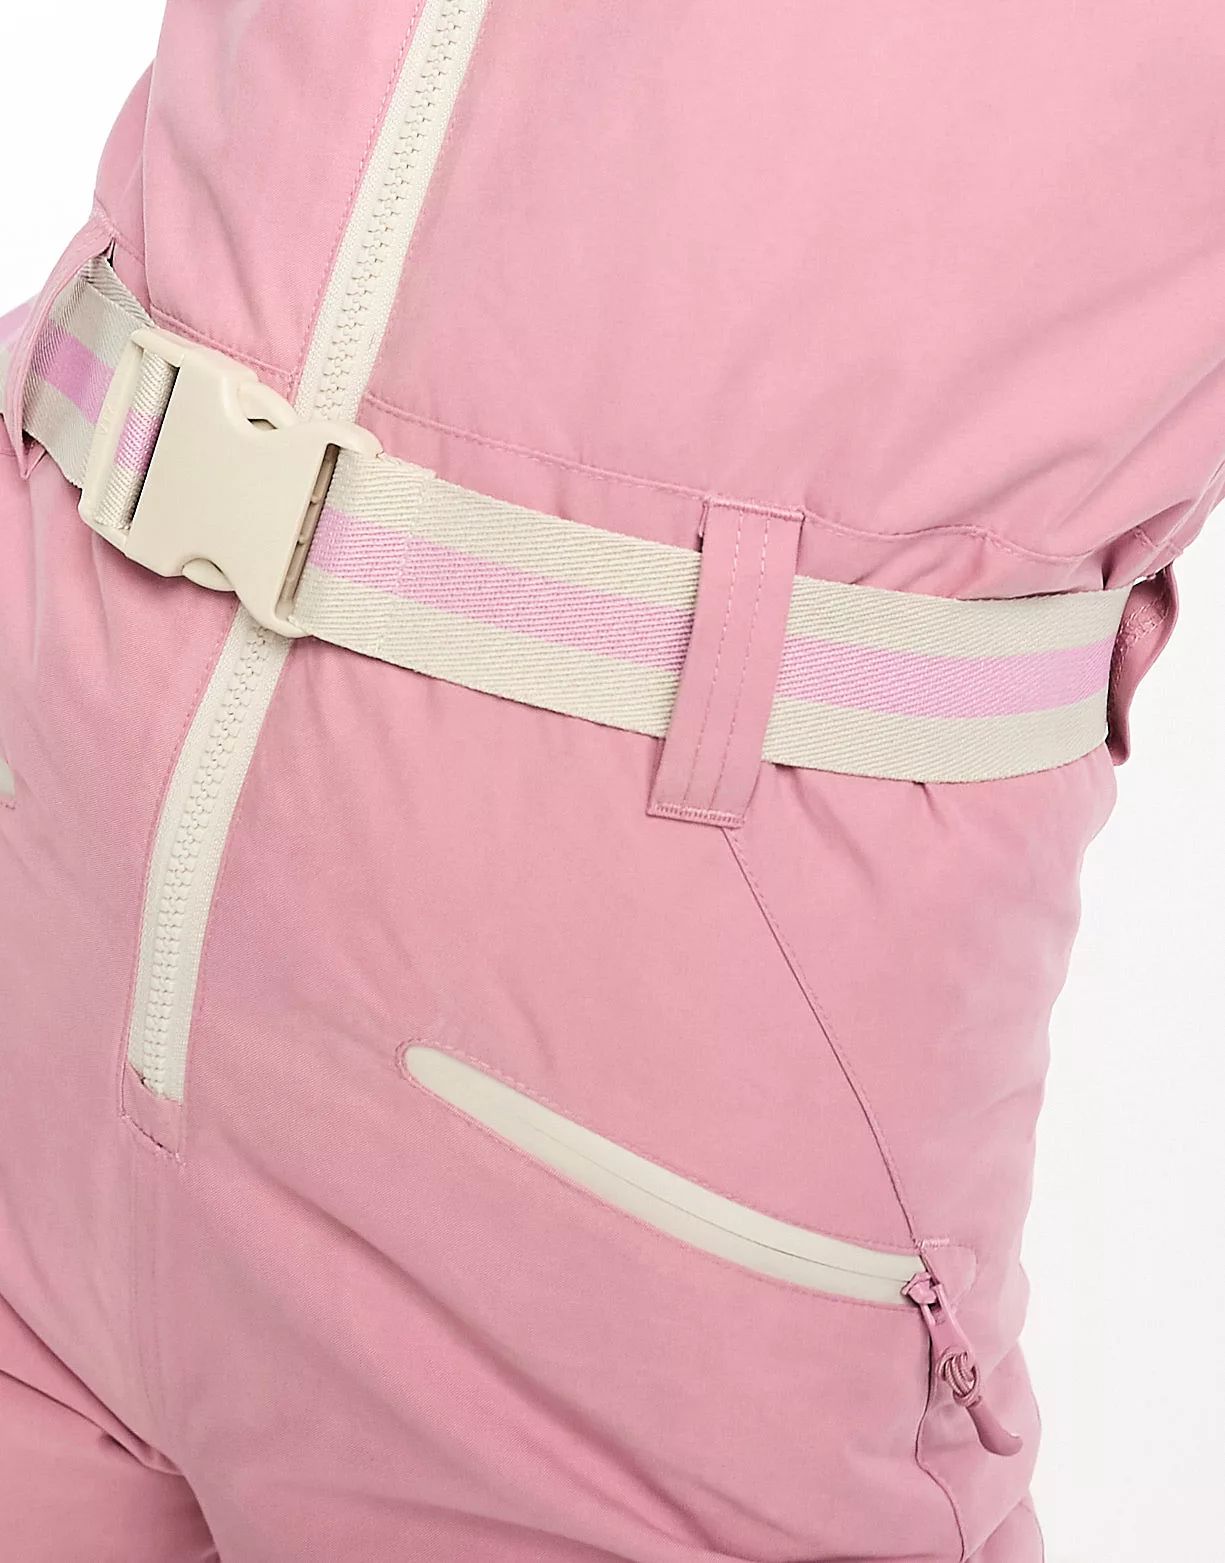 Protest Prtshowy 23 ski suit in pink and white | ASOS (Global)